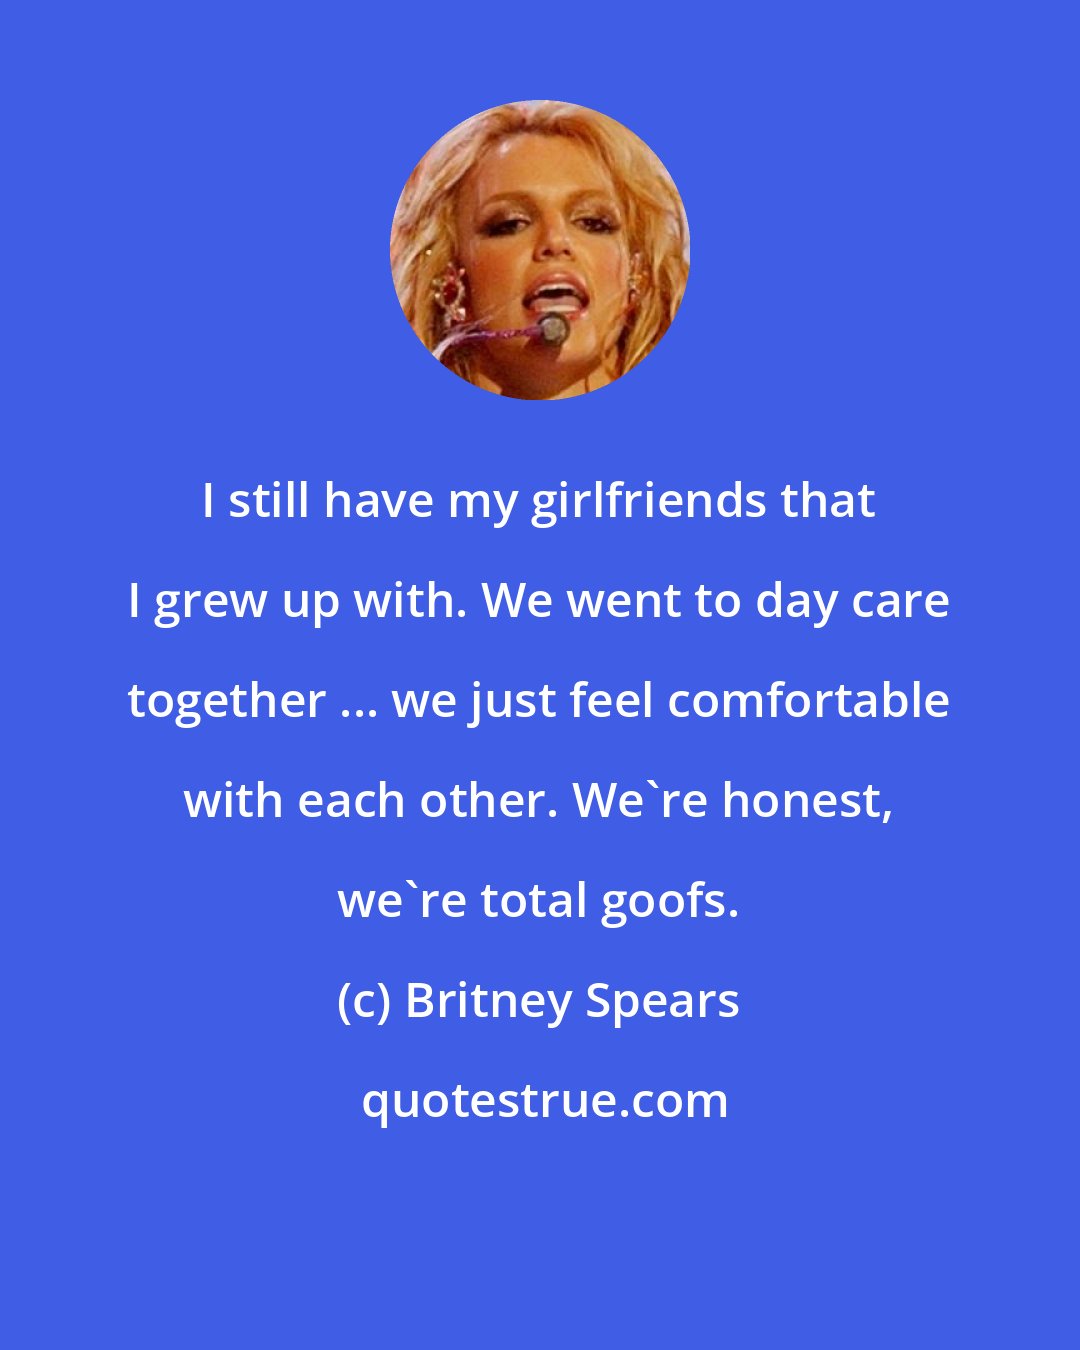 Britney Spears: I still have my girlfriends that I grew up with. We went to day care together ... we just feel comfortable with each other. We're honest, we're total goofs.